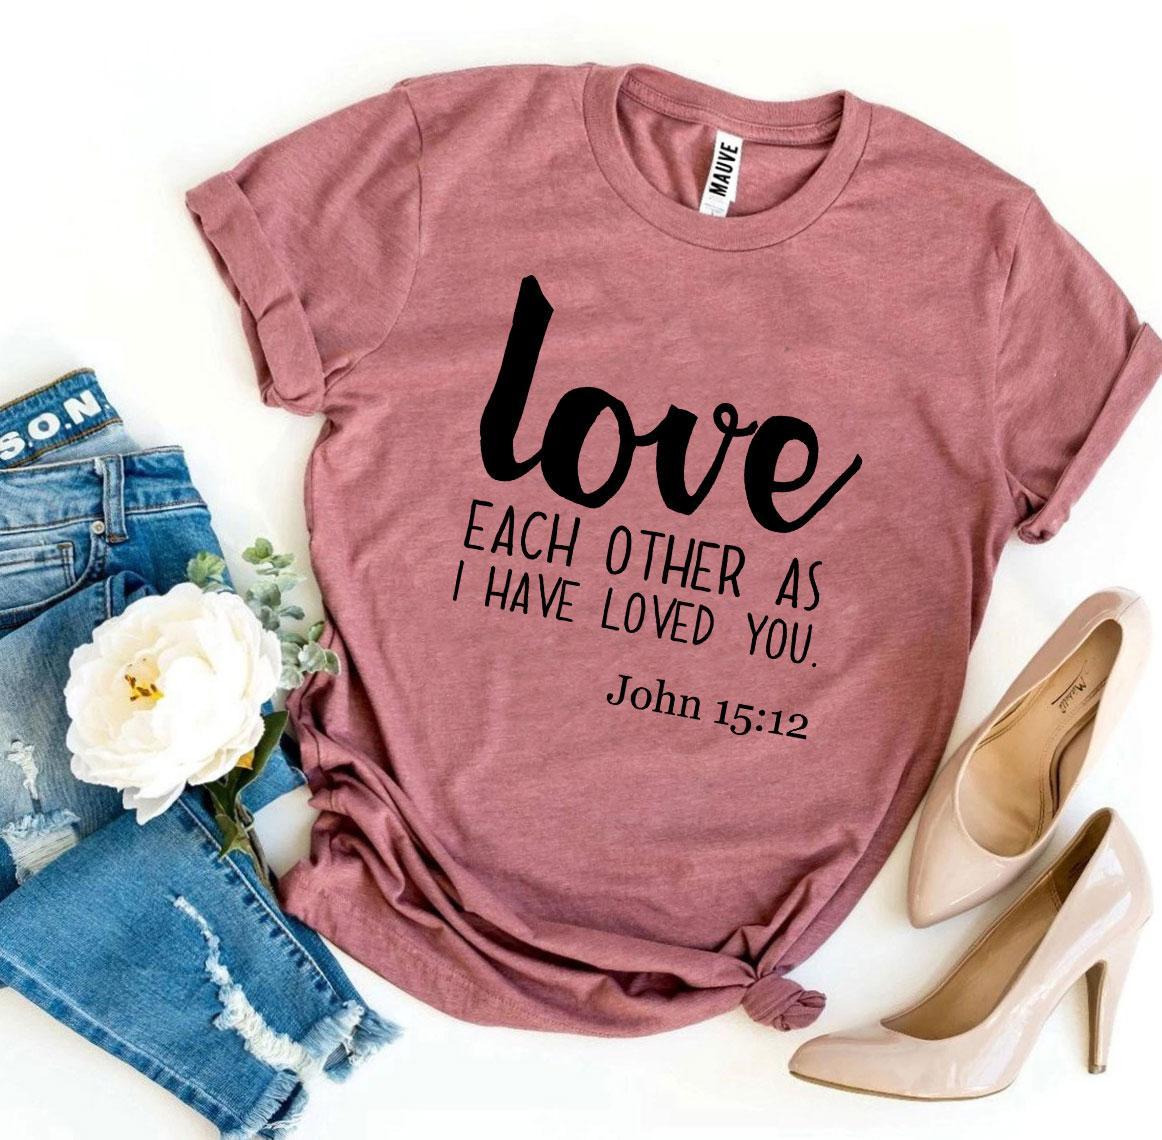 Love Each Other As I Have Loved You T-shirt - Jesus Christ Heals